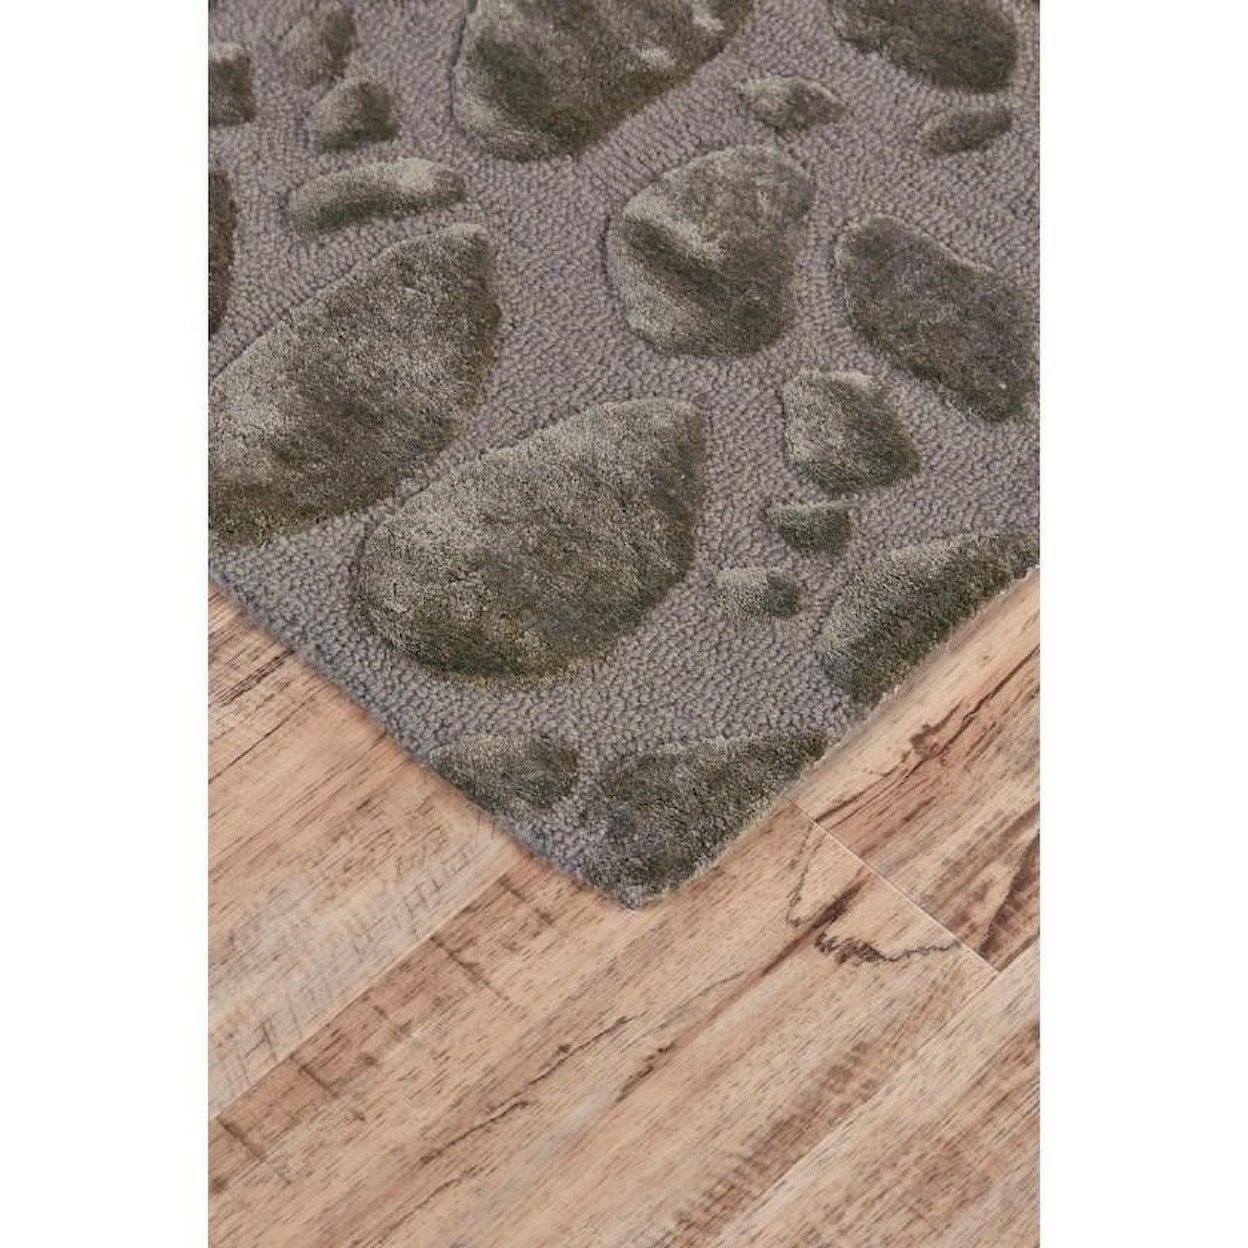 Feizy Rugs Mali Pewter 2' x 3' Area Rug